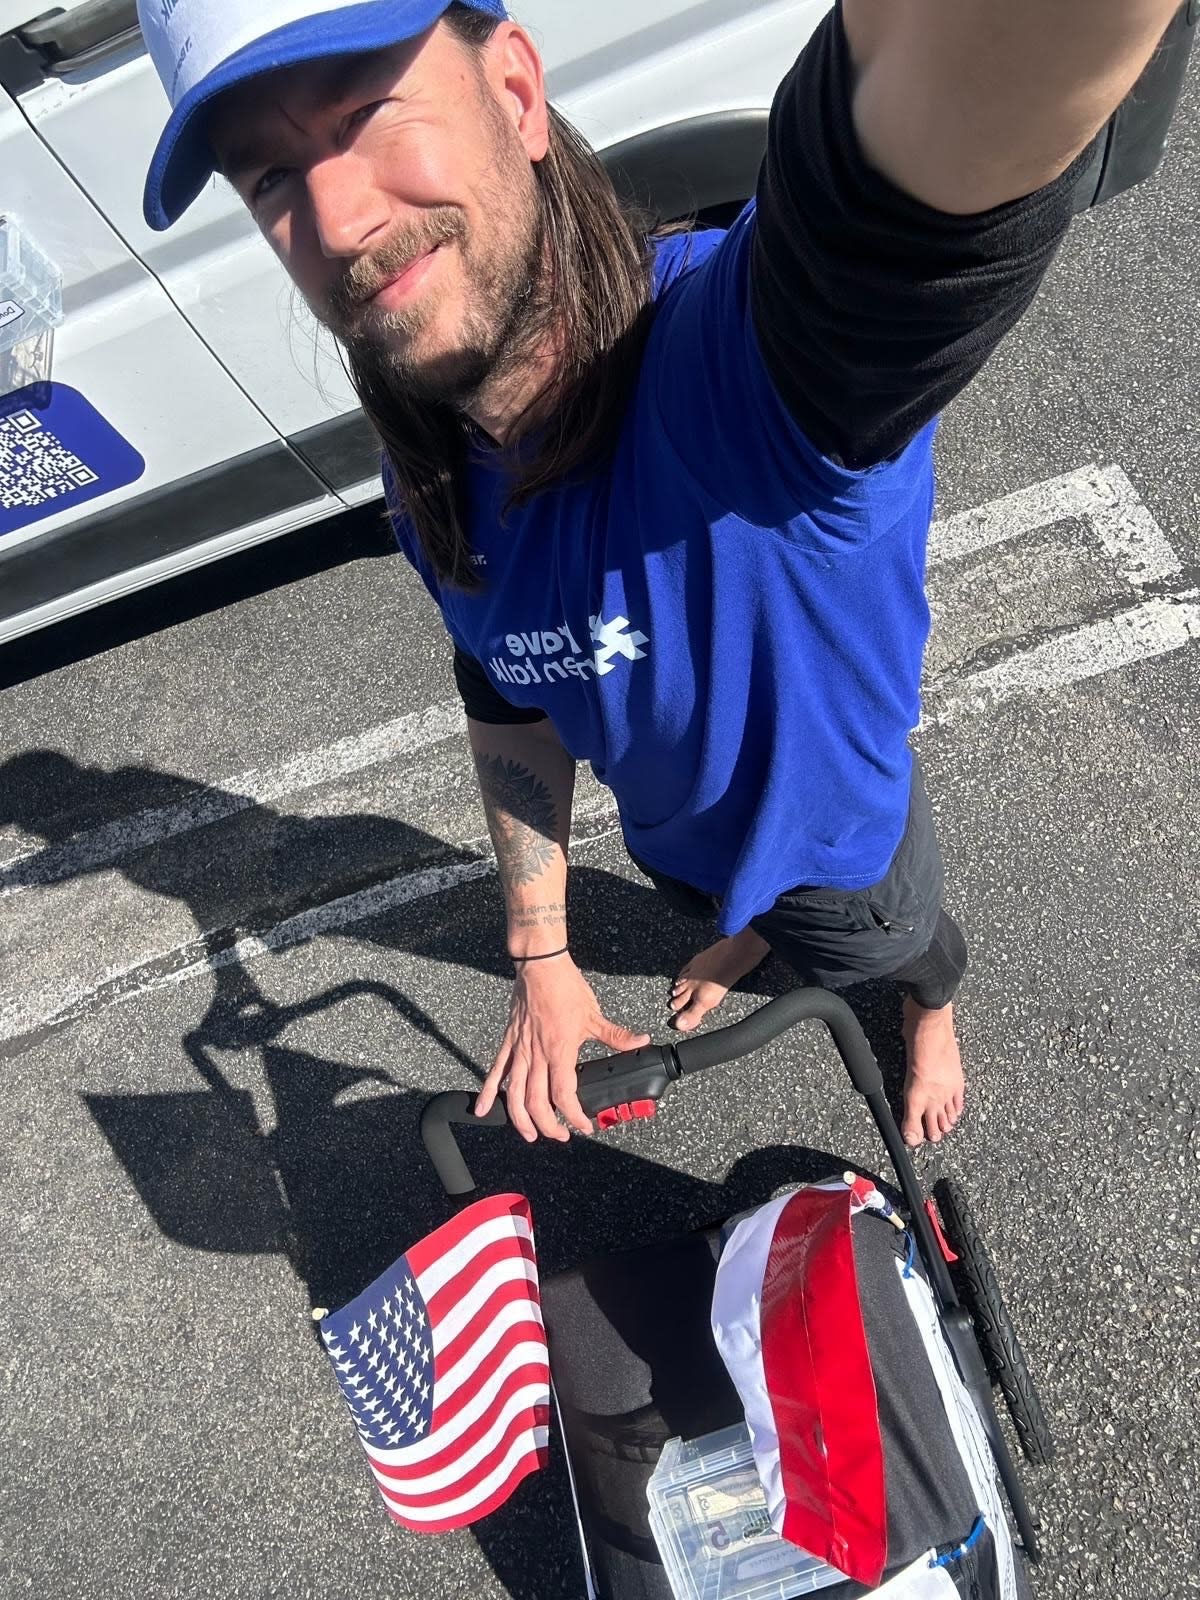 The self-coined Dutch Forrest Gump, Nootenboom is walking across the country barefoot while pushing a trolley cart he's nicknamed Bubba, a nod to a character in the 1994 Tom Hanks film.